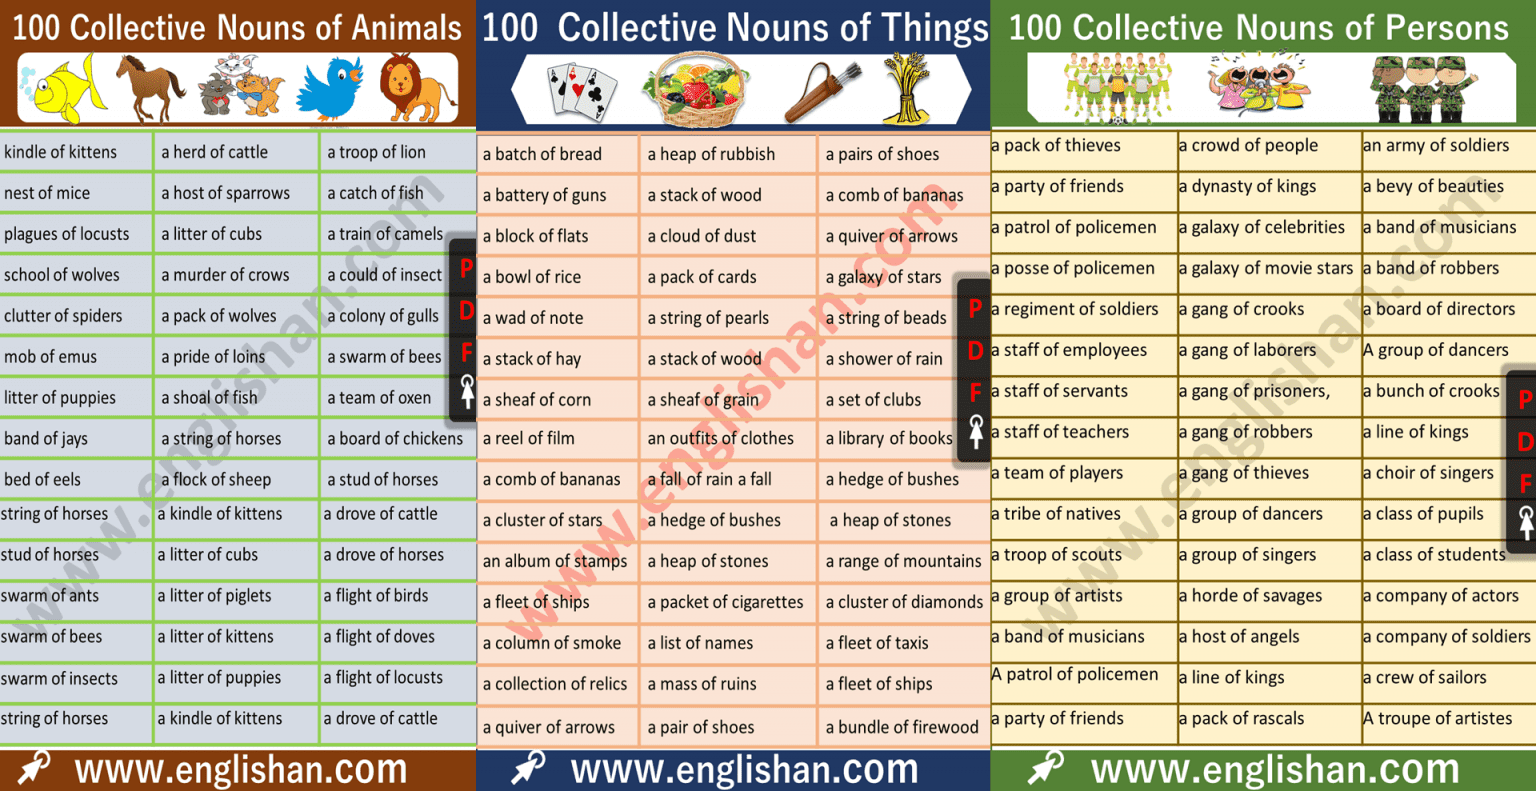 list of collective nouns for animals